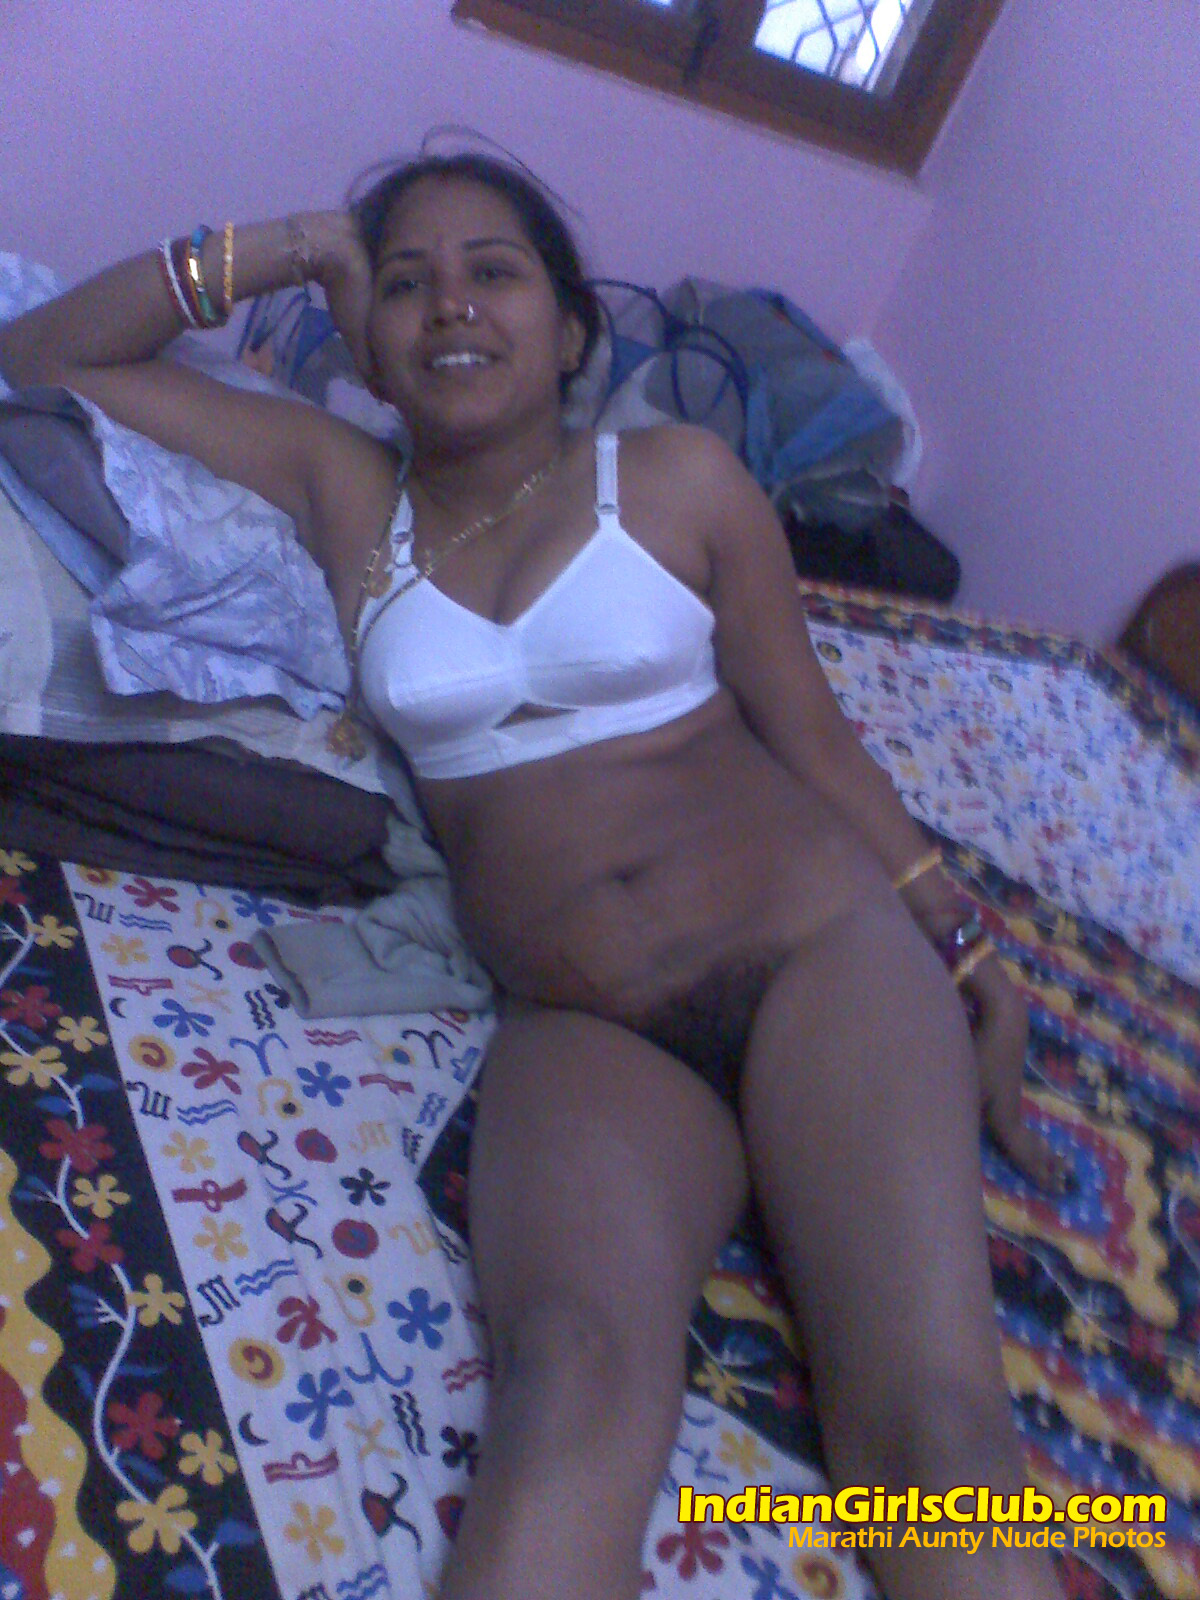 Marathi women nude show - Sex Quality image 100% free. Comments: 1